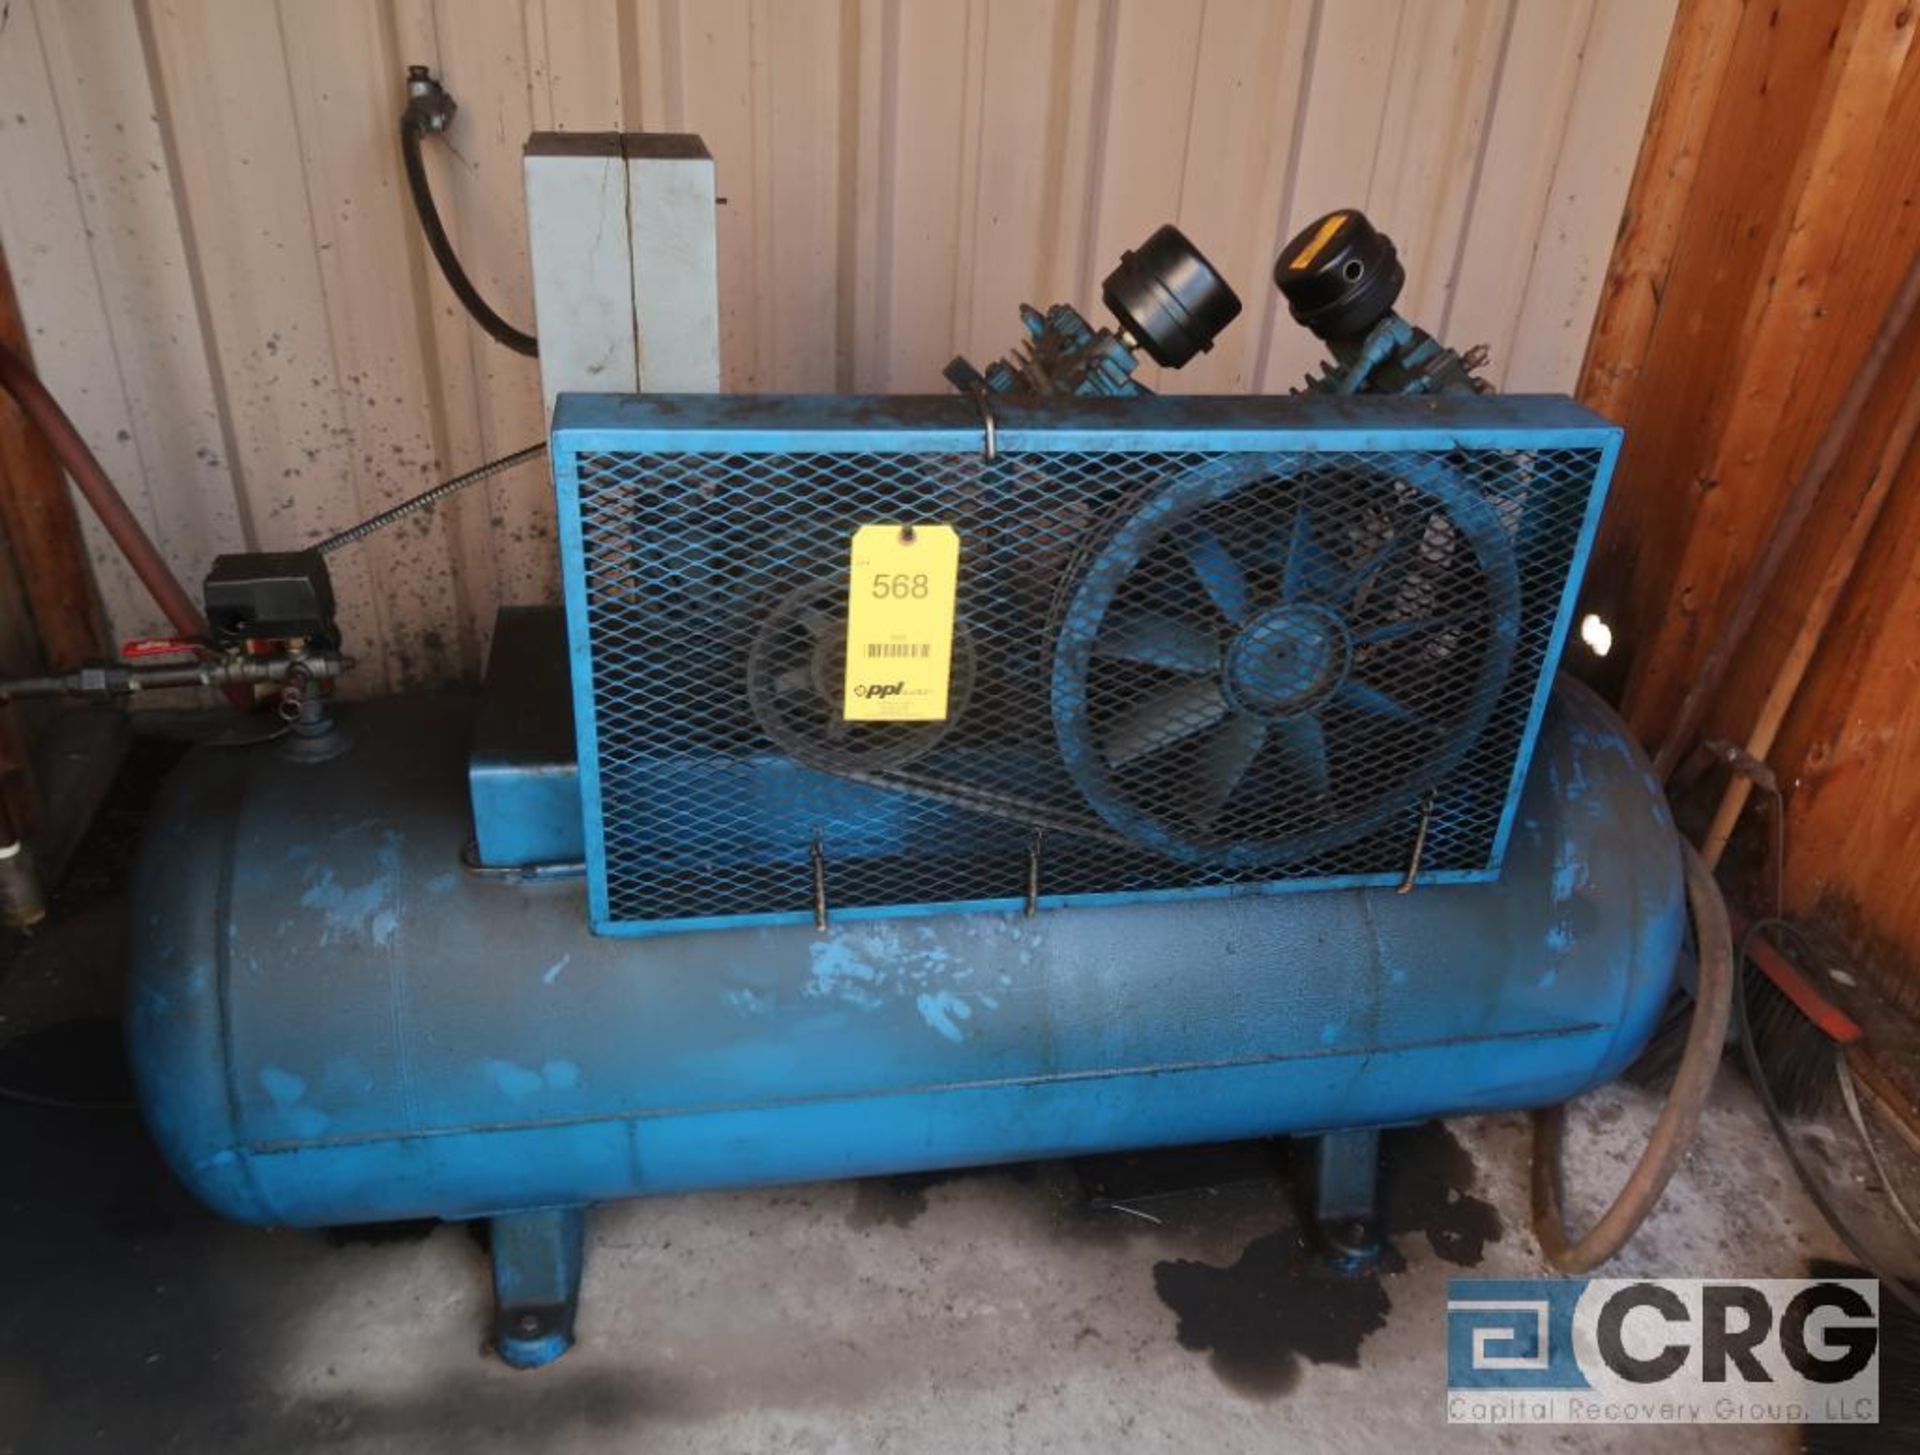 EMQLO horizontal air compressor, 5 HP motor, 200 psi, located outside in shed (Maintenance Shop)